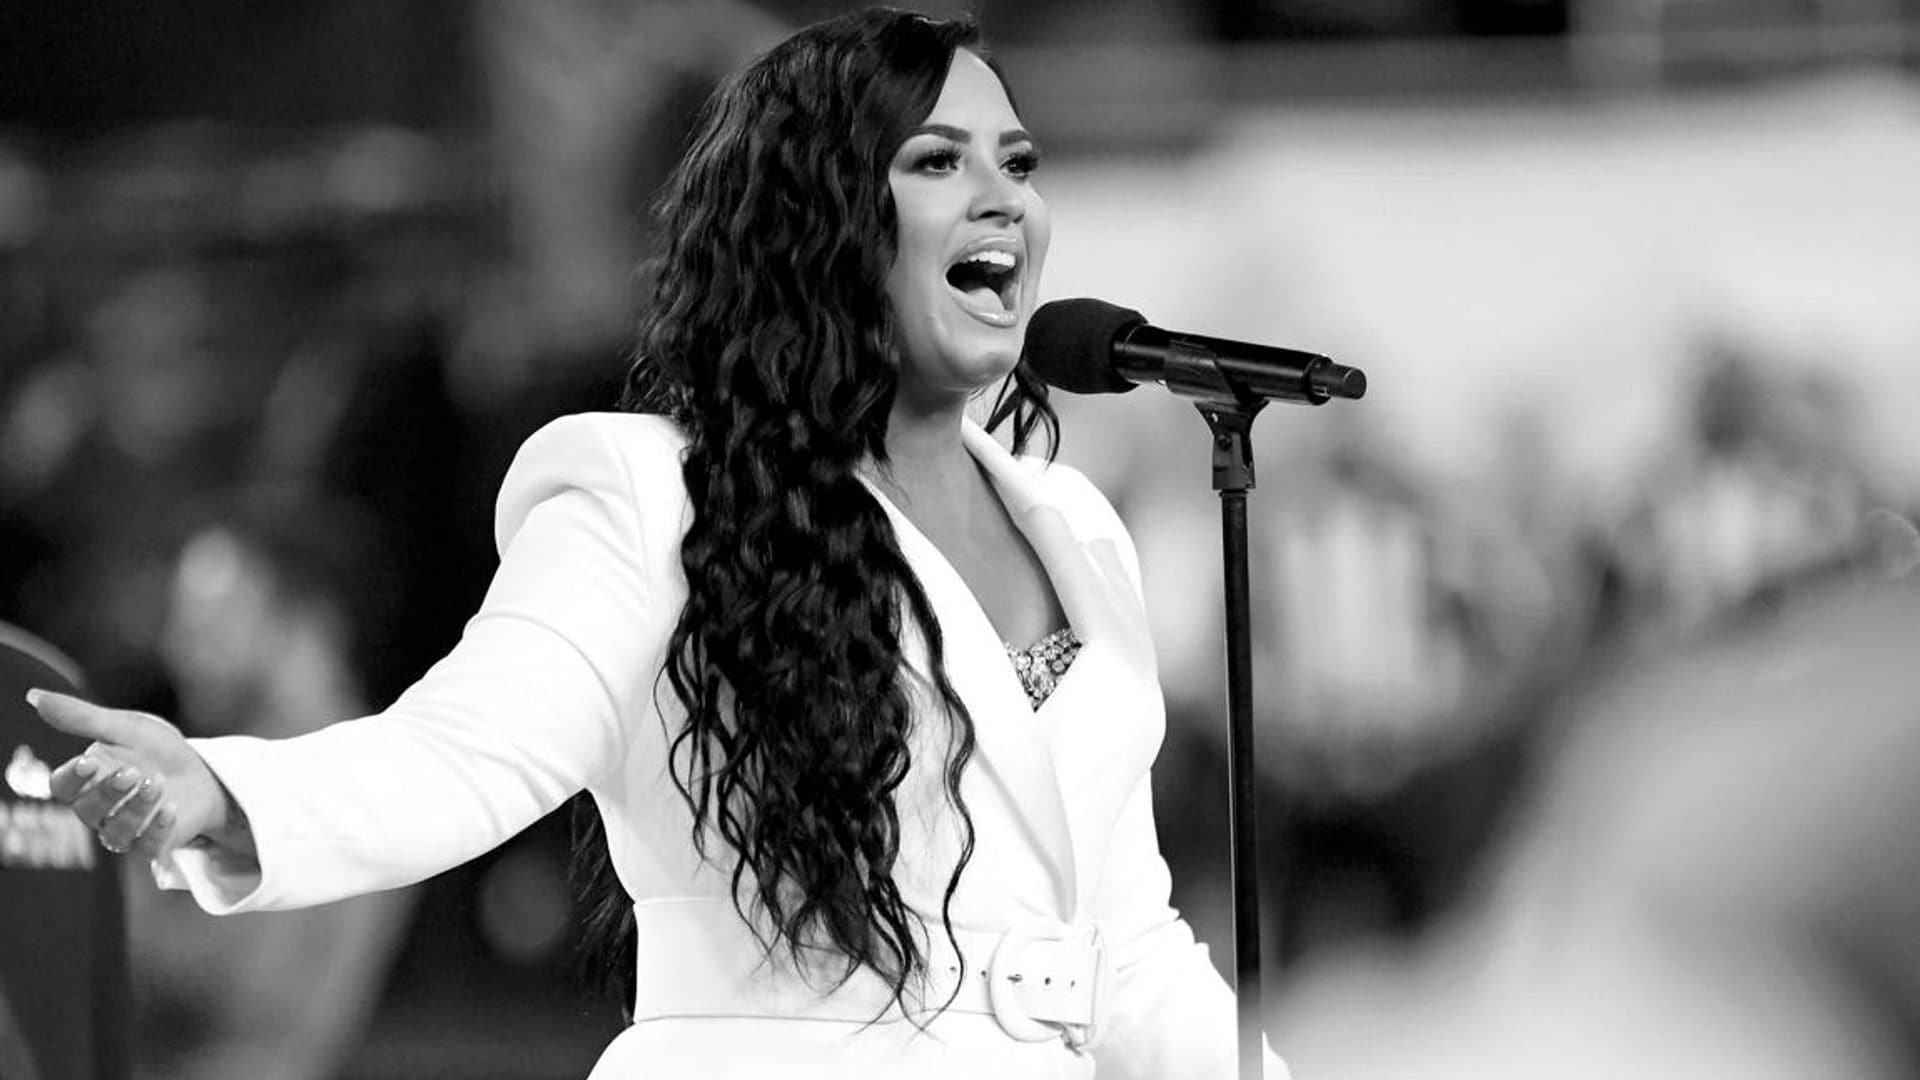 Demi Lovato reflects on mental health disorders, the coronavirus pandemic, and Black Lives Matter in a personal letter